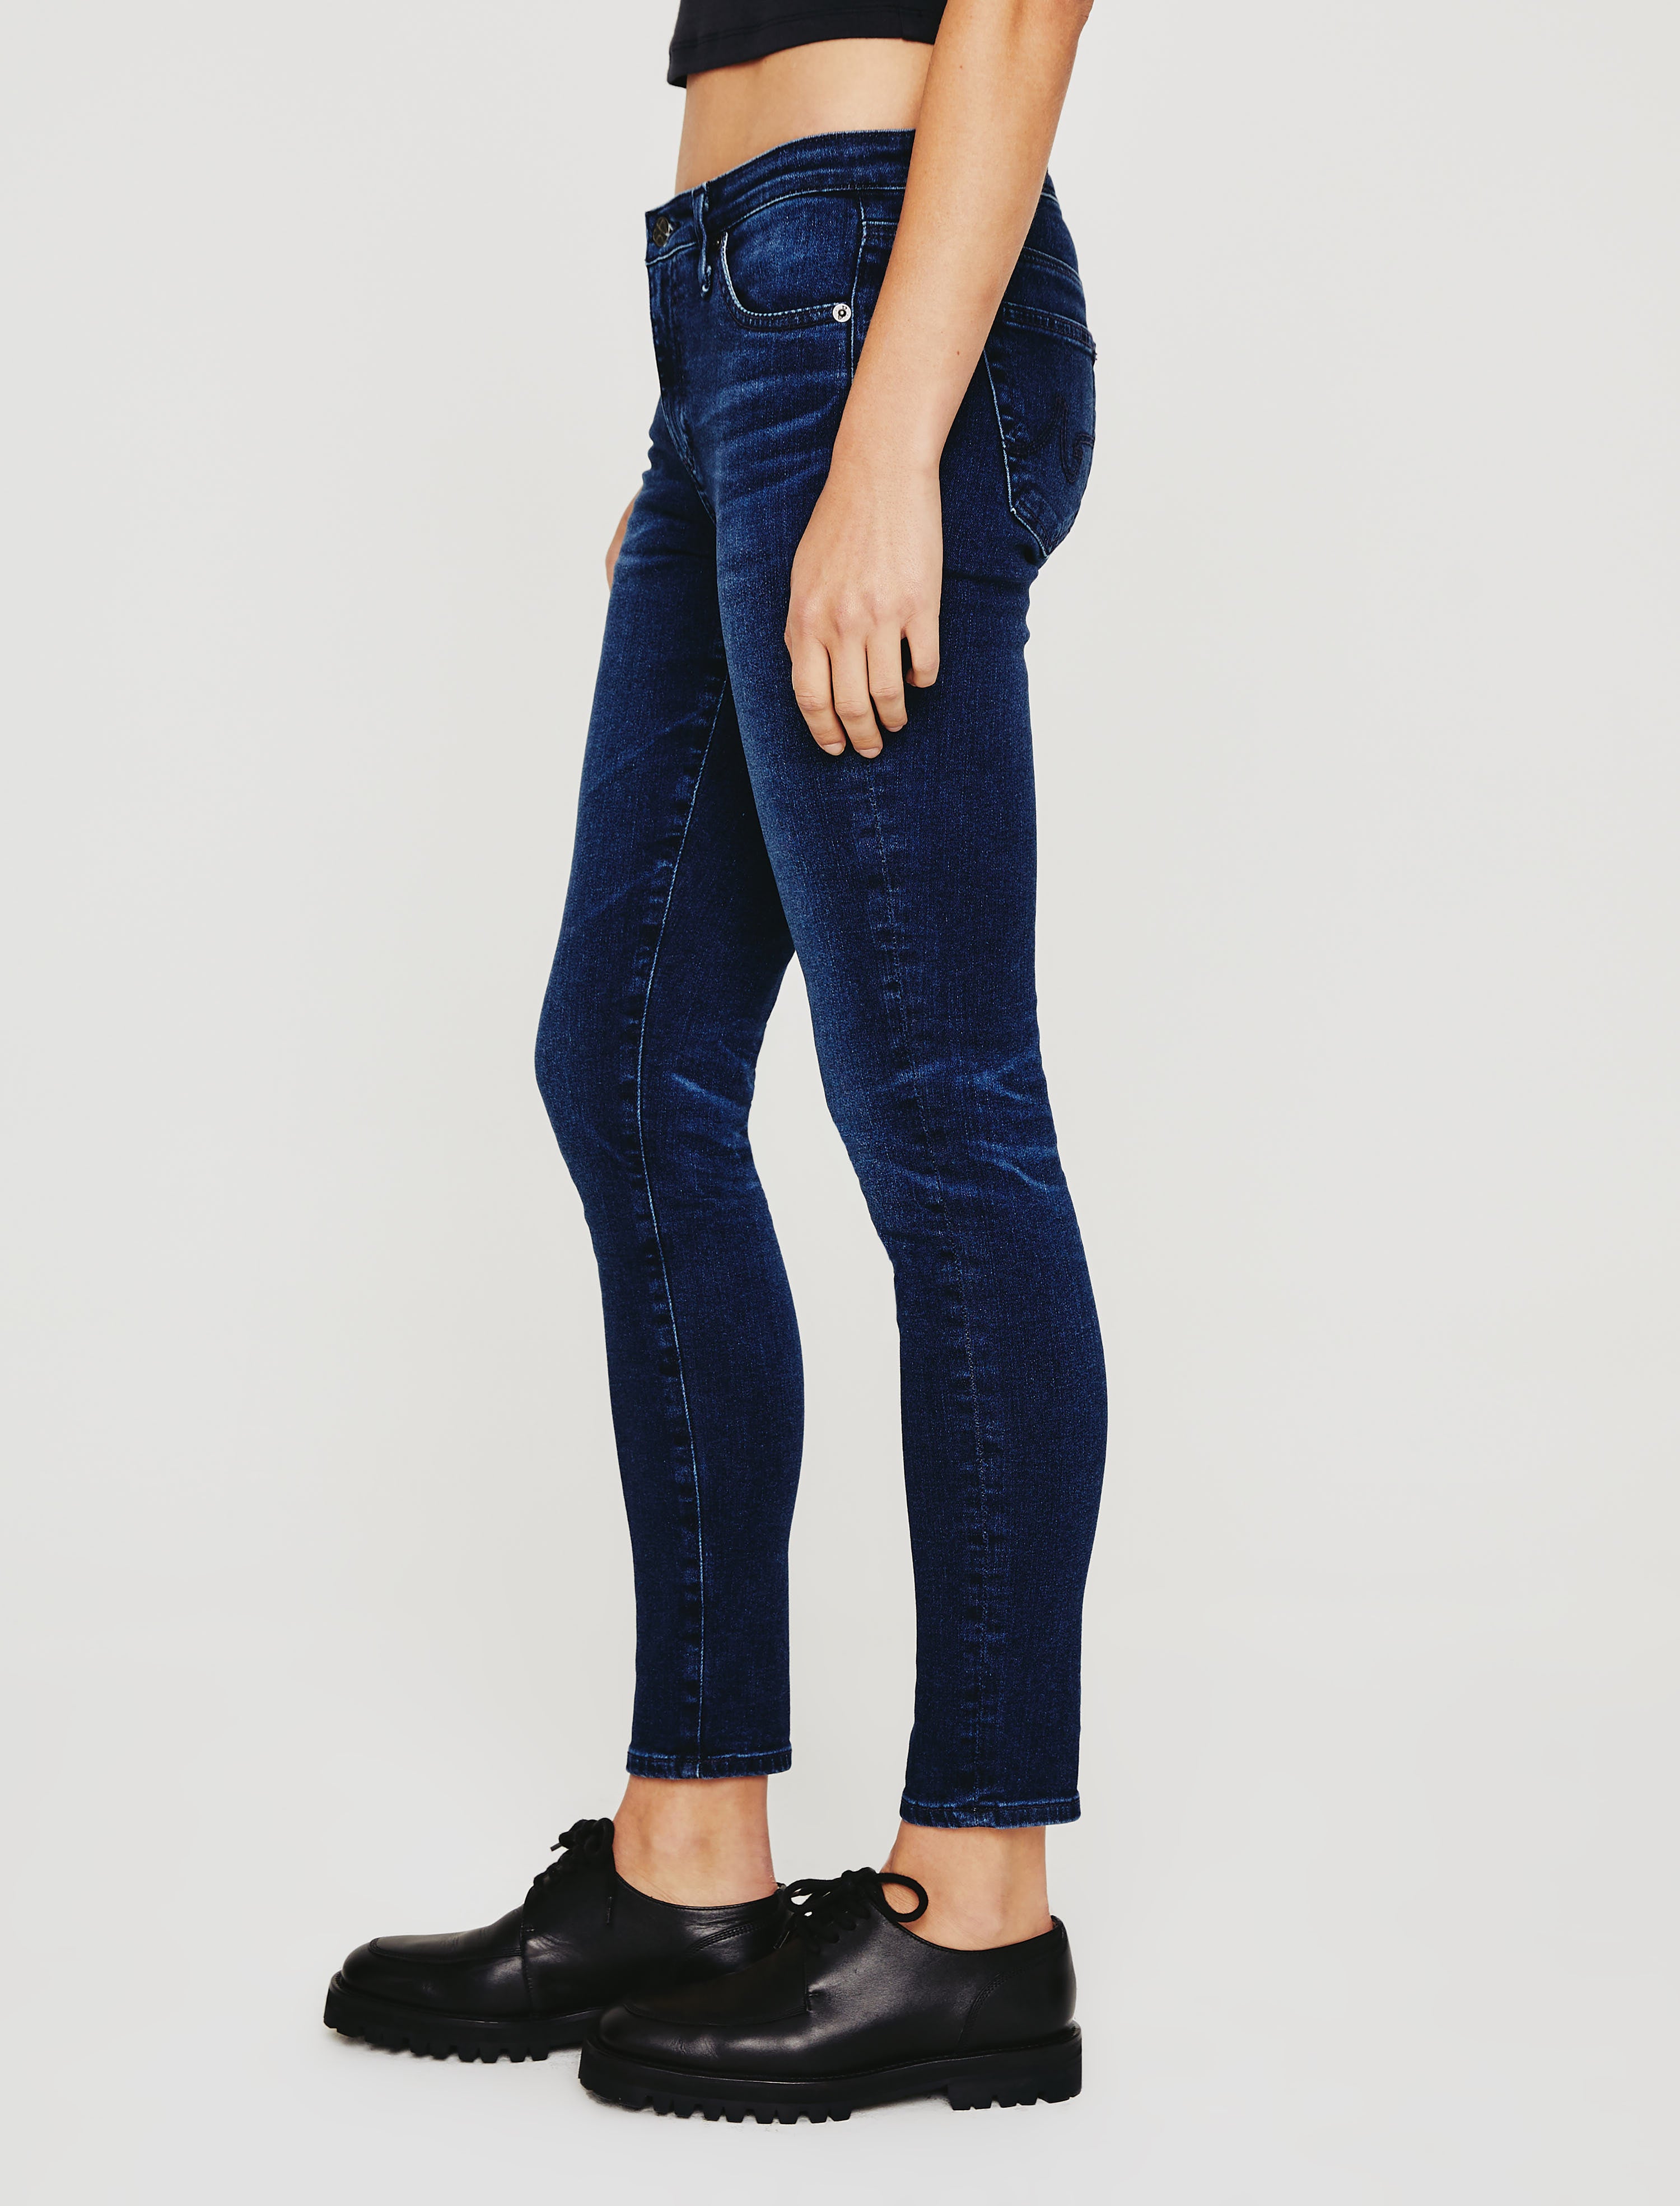 Womens Legging Ankle 10 Years Alliance at AG Jeans Official Store